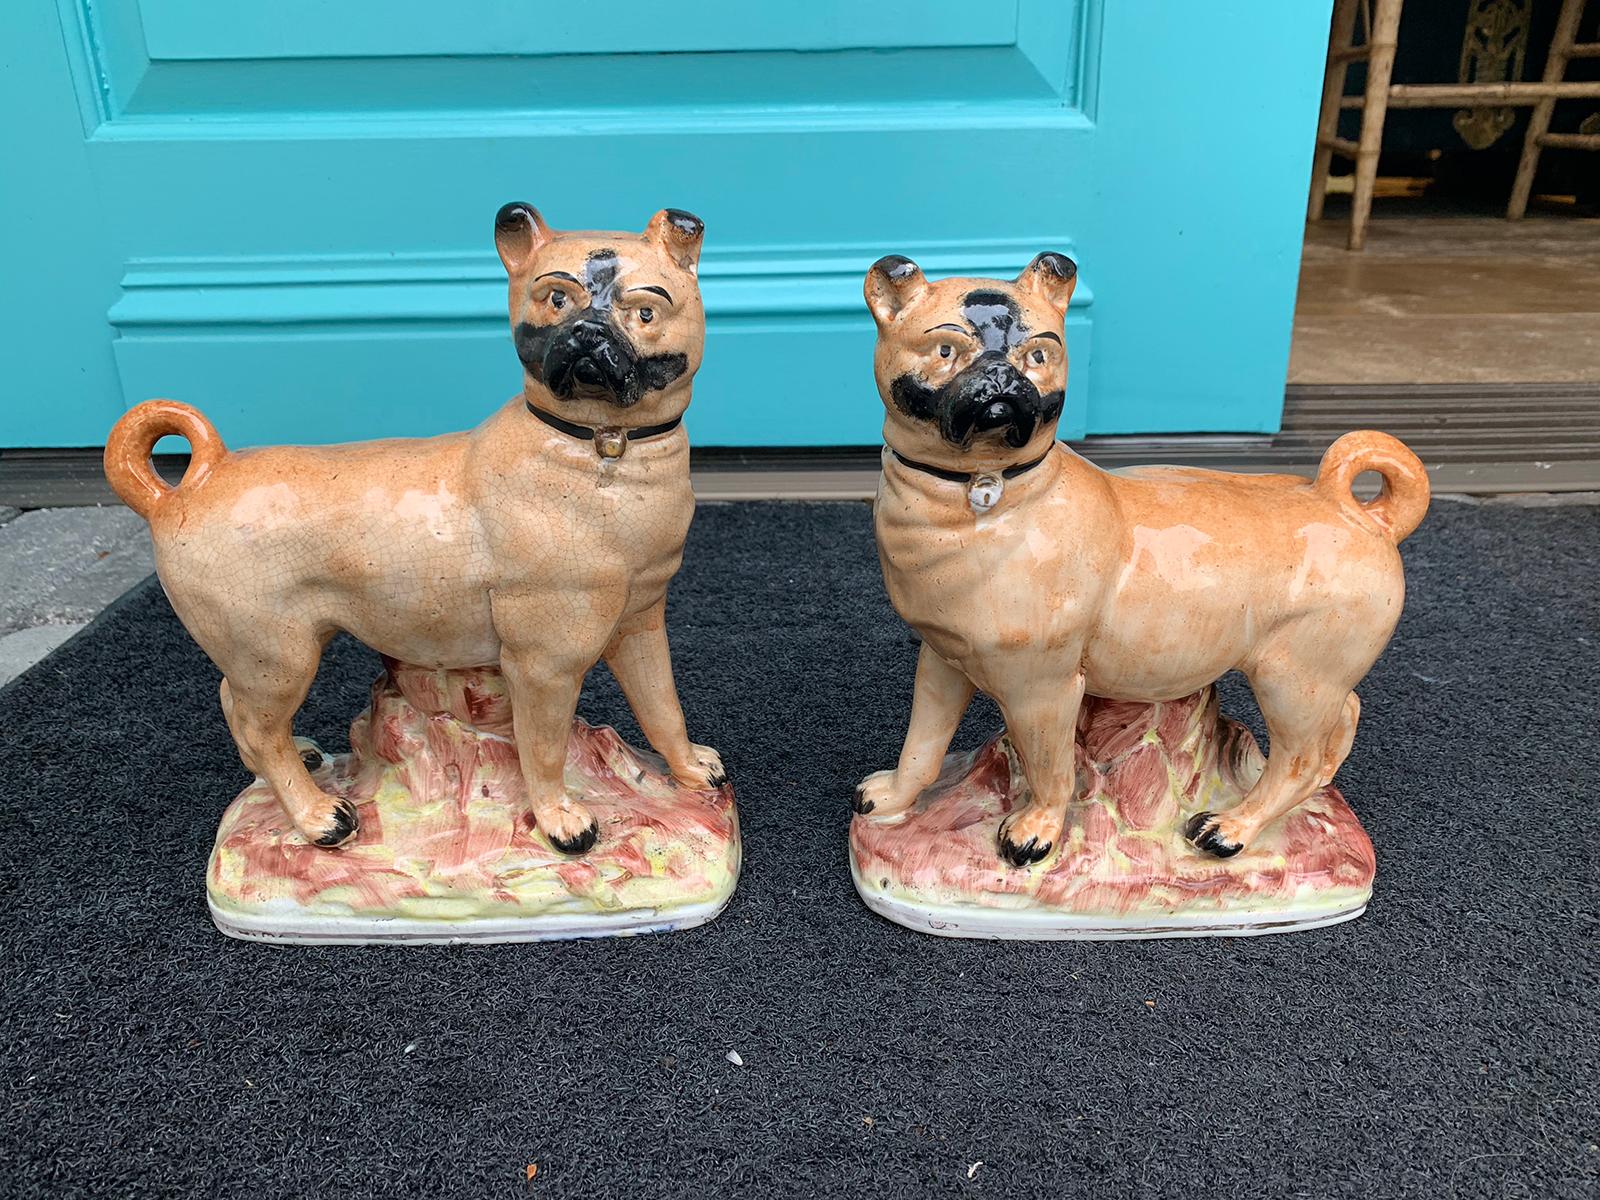 Pair of circa 1860 Staffordshire pottery figures of standing pugs
Measure: One: 7.25